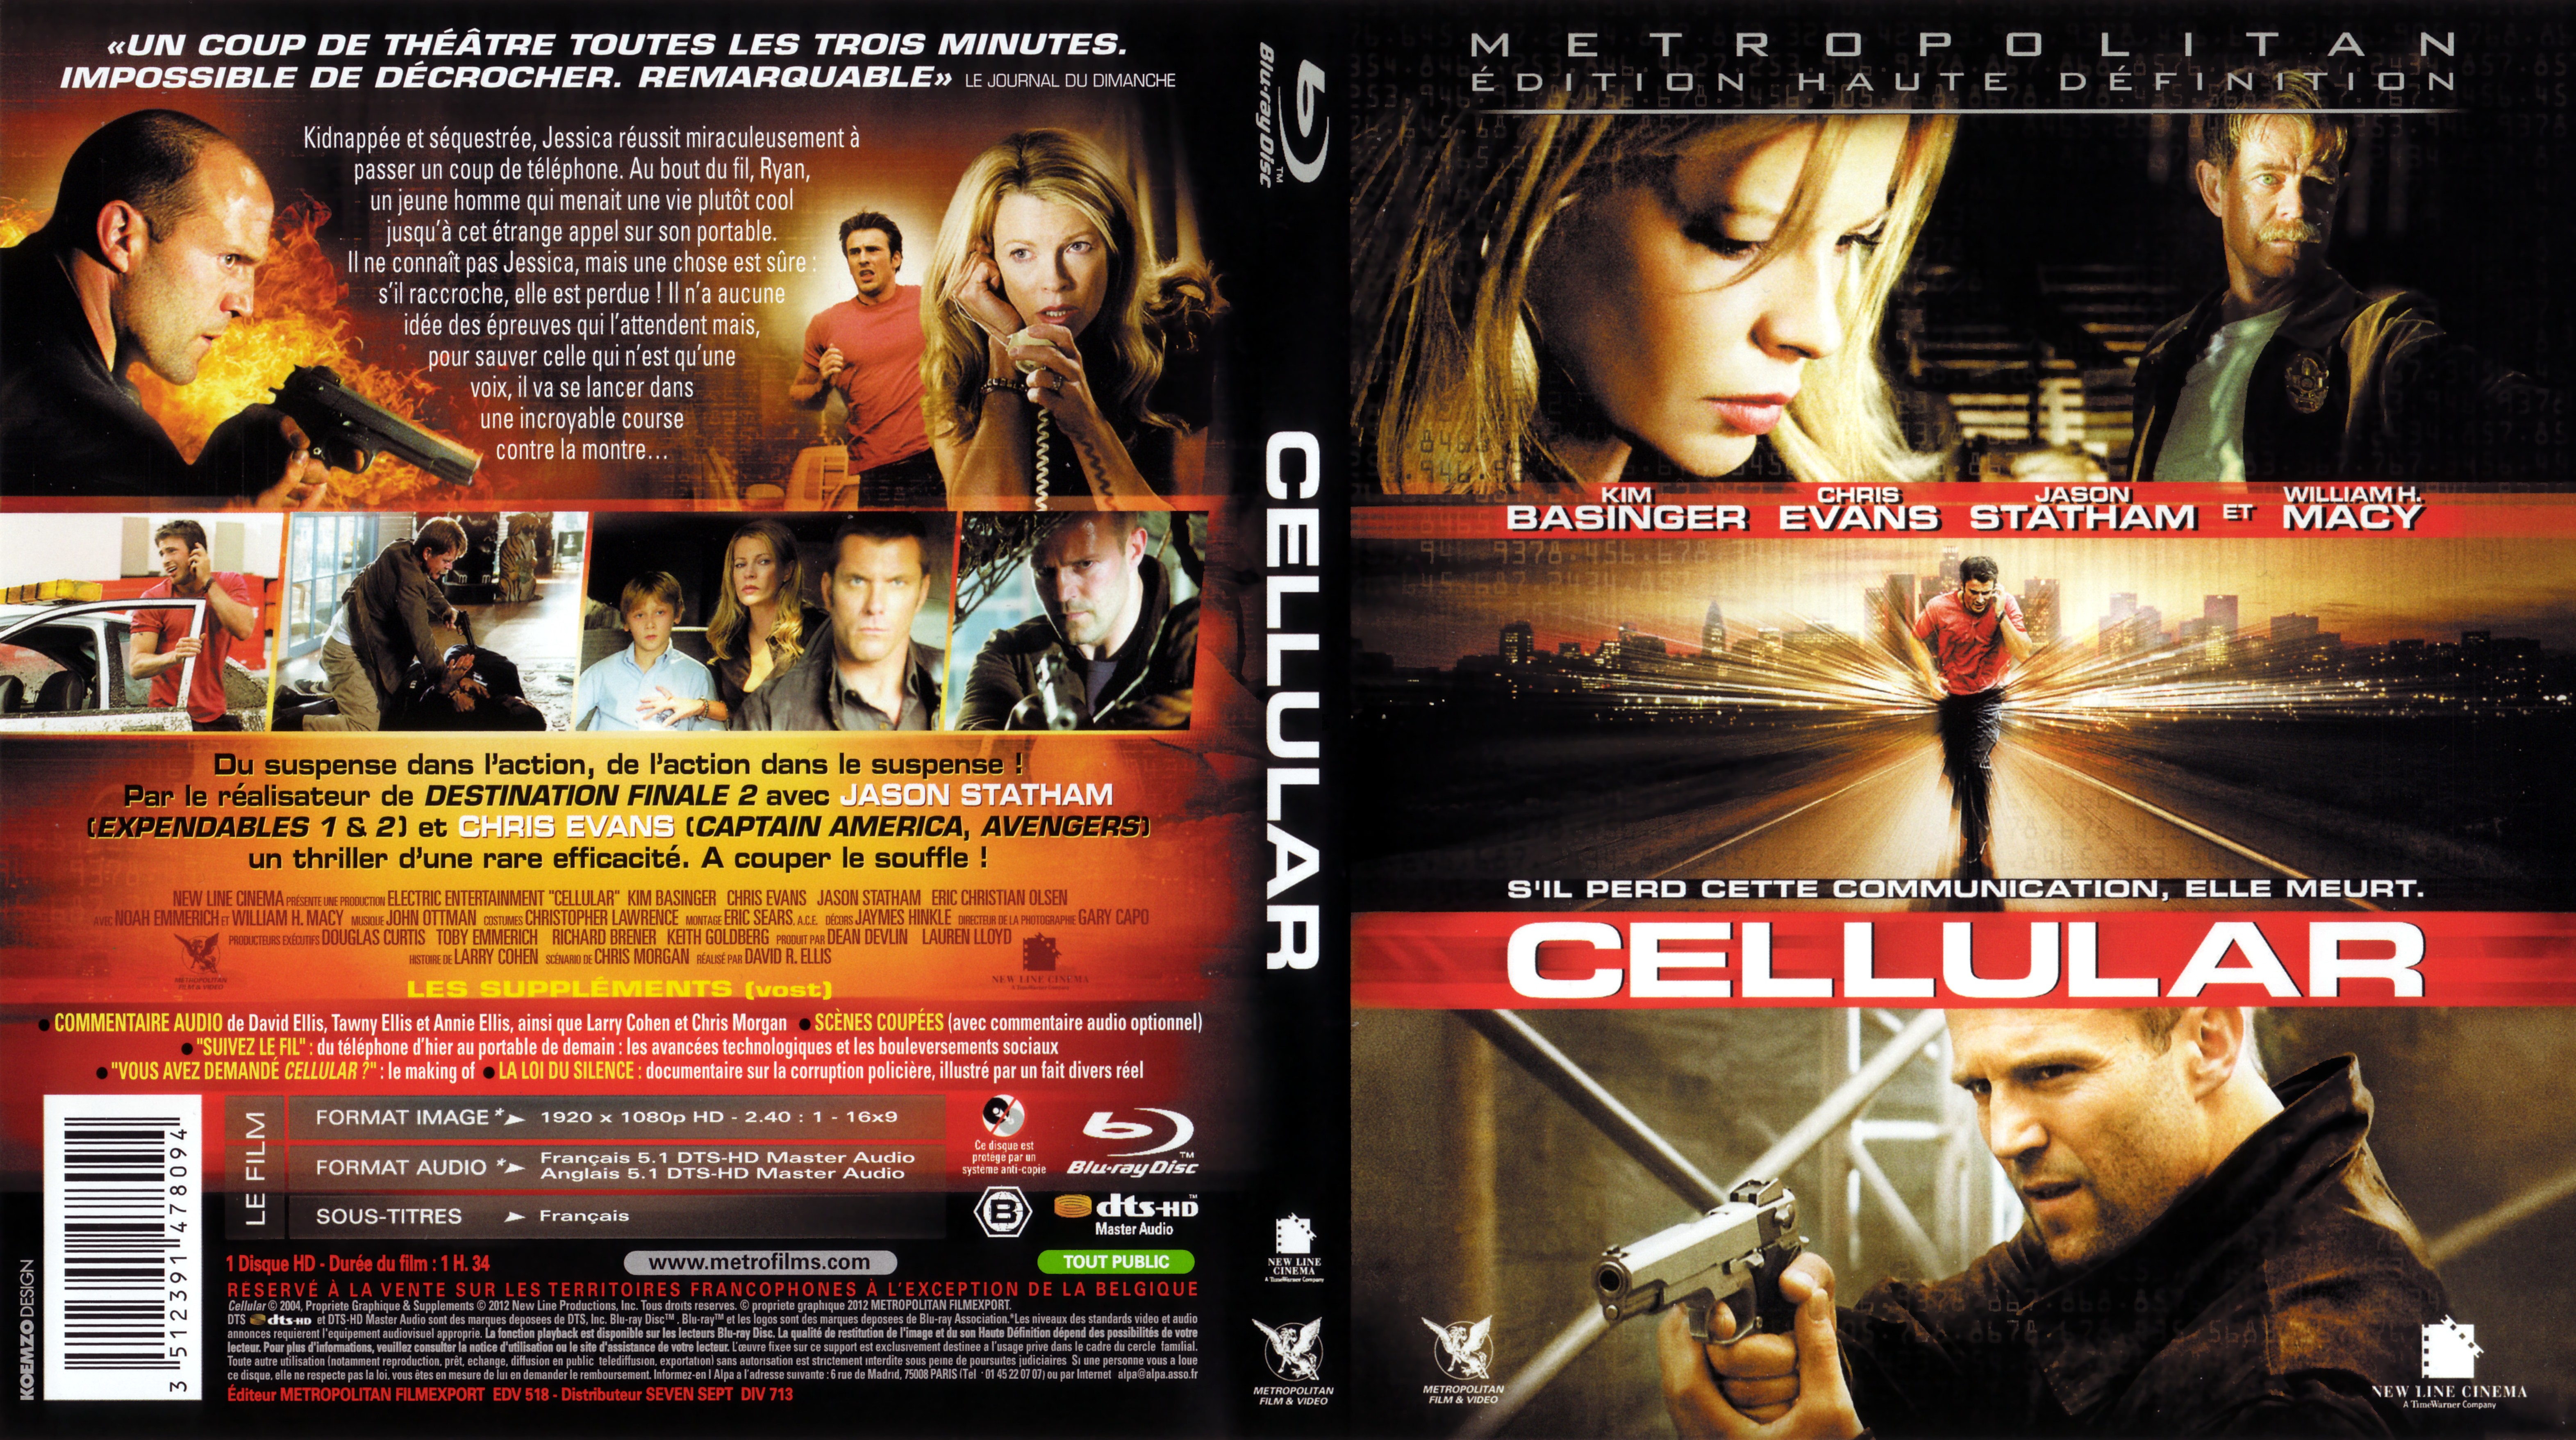 Jaquette DVD Cellular (BLU-RAY)